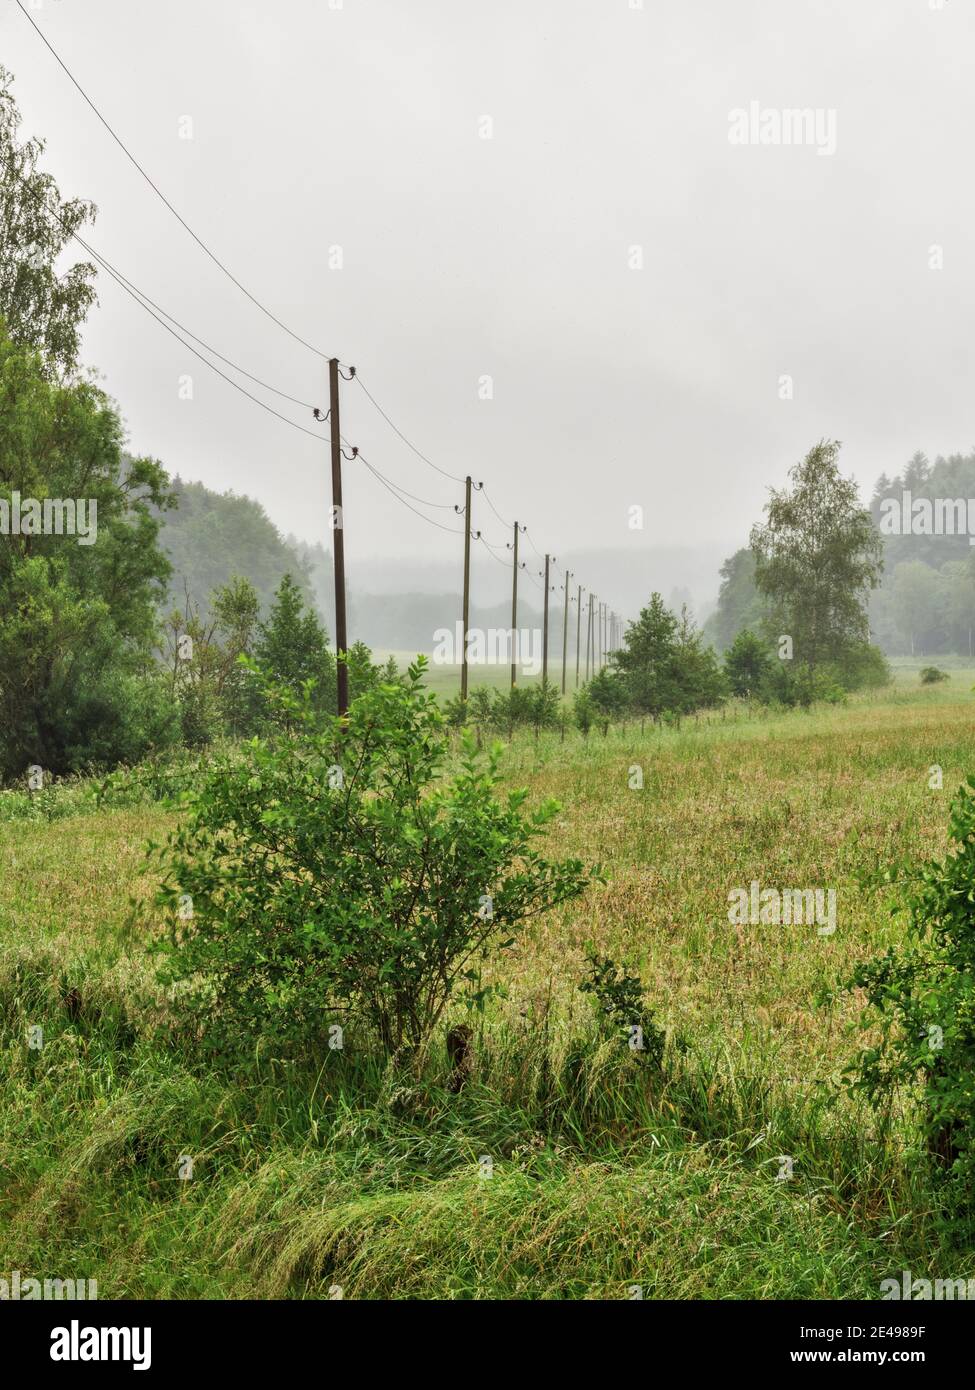 Meadows, trees, bushes, hedges, fences, streams, power lines Stock Photo